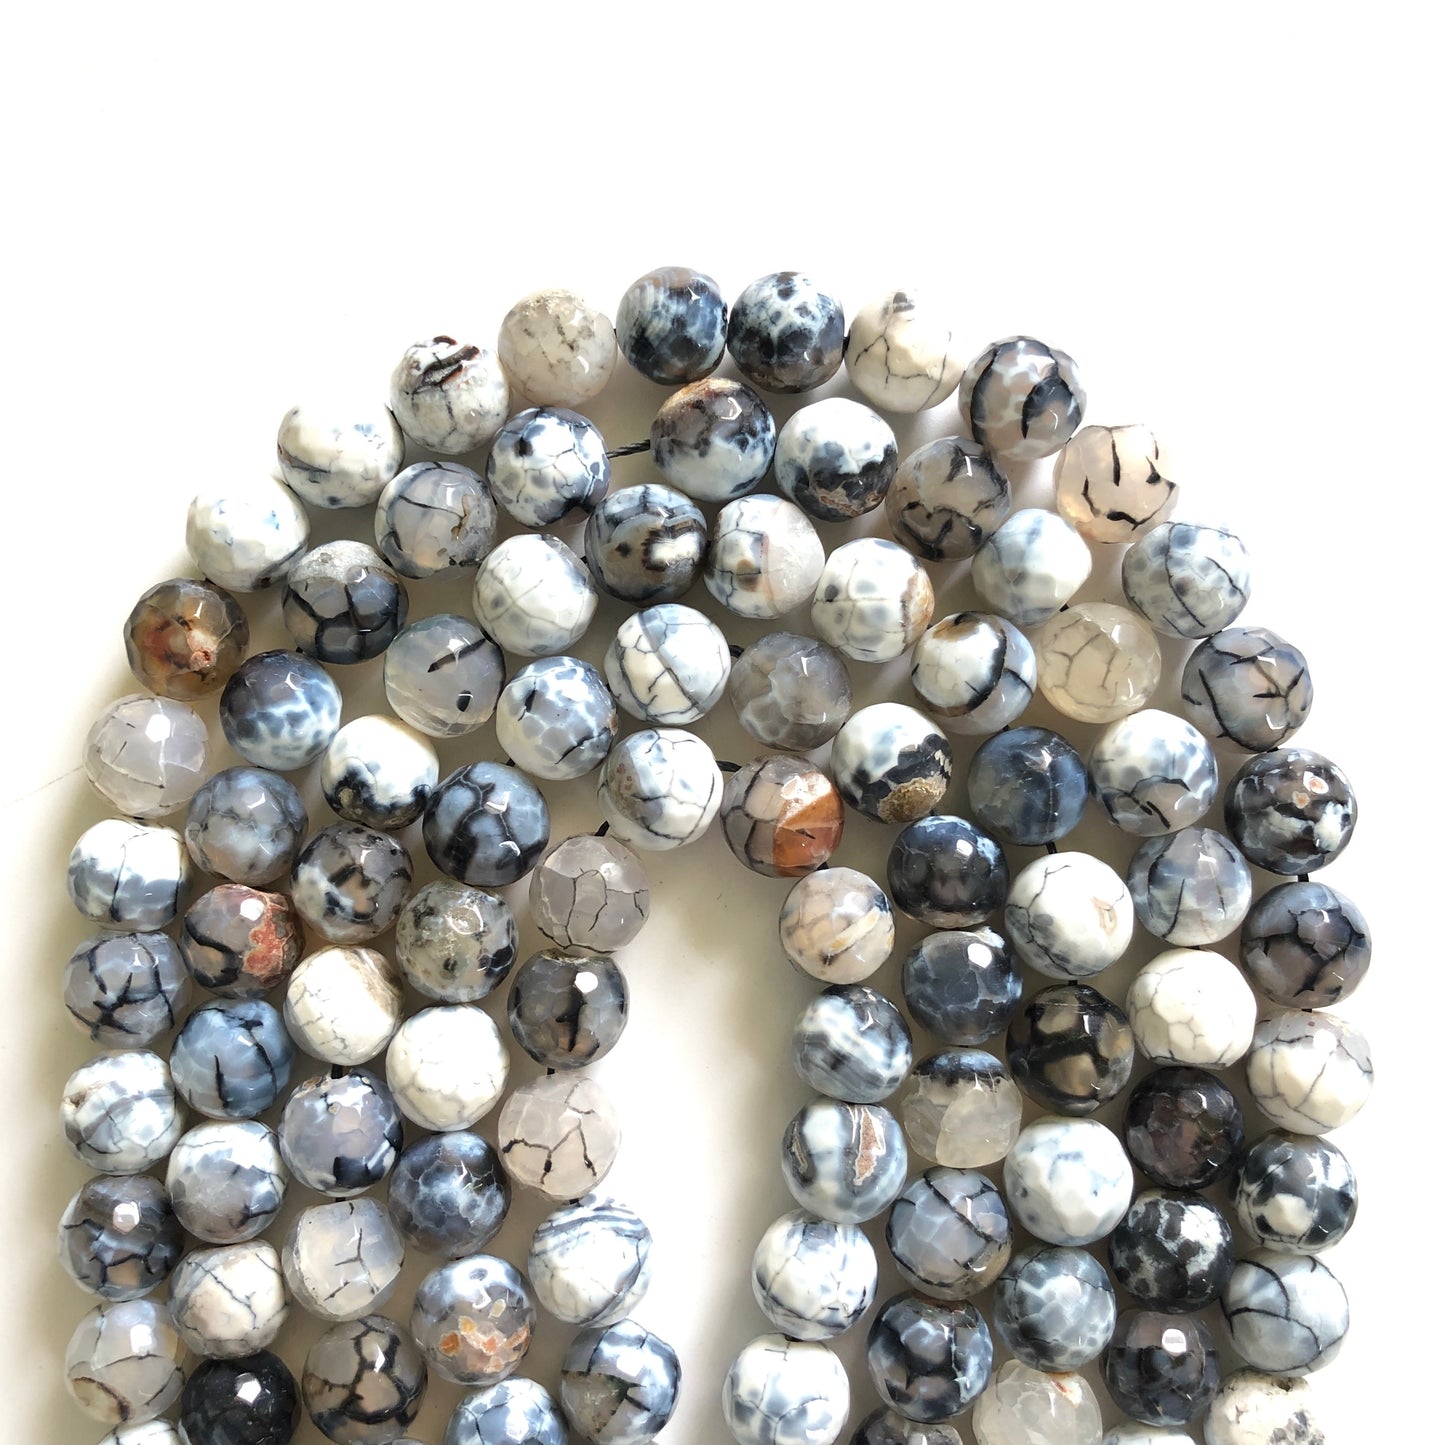 2 Strands/lot 12mm White Black Faceted Fire Agate Stone Beads Stone Beads 12mm Stone Beads Faceted Agate Beads Charms Beads Beyond